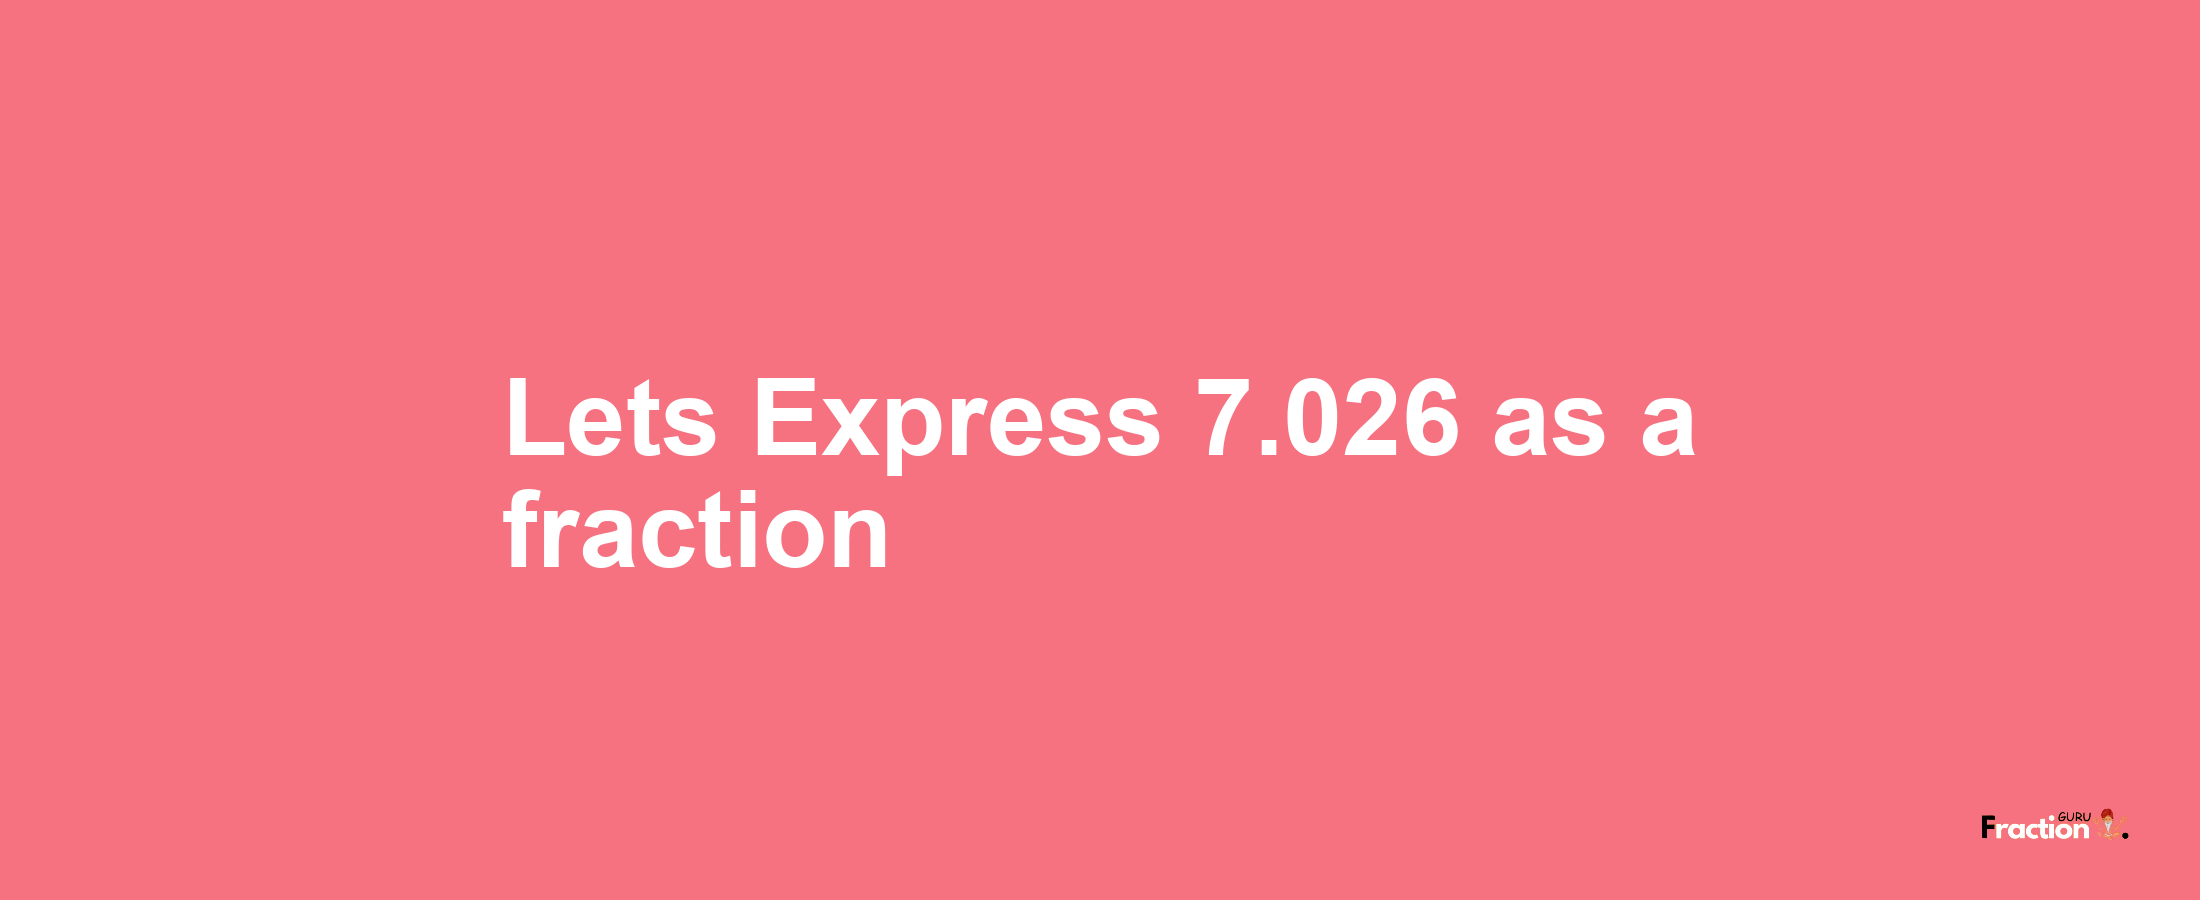 Lets Express 7.026 as afraction